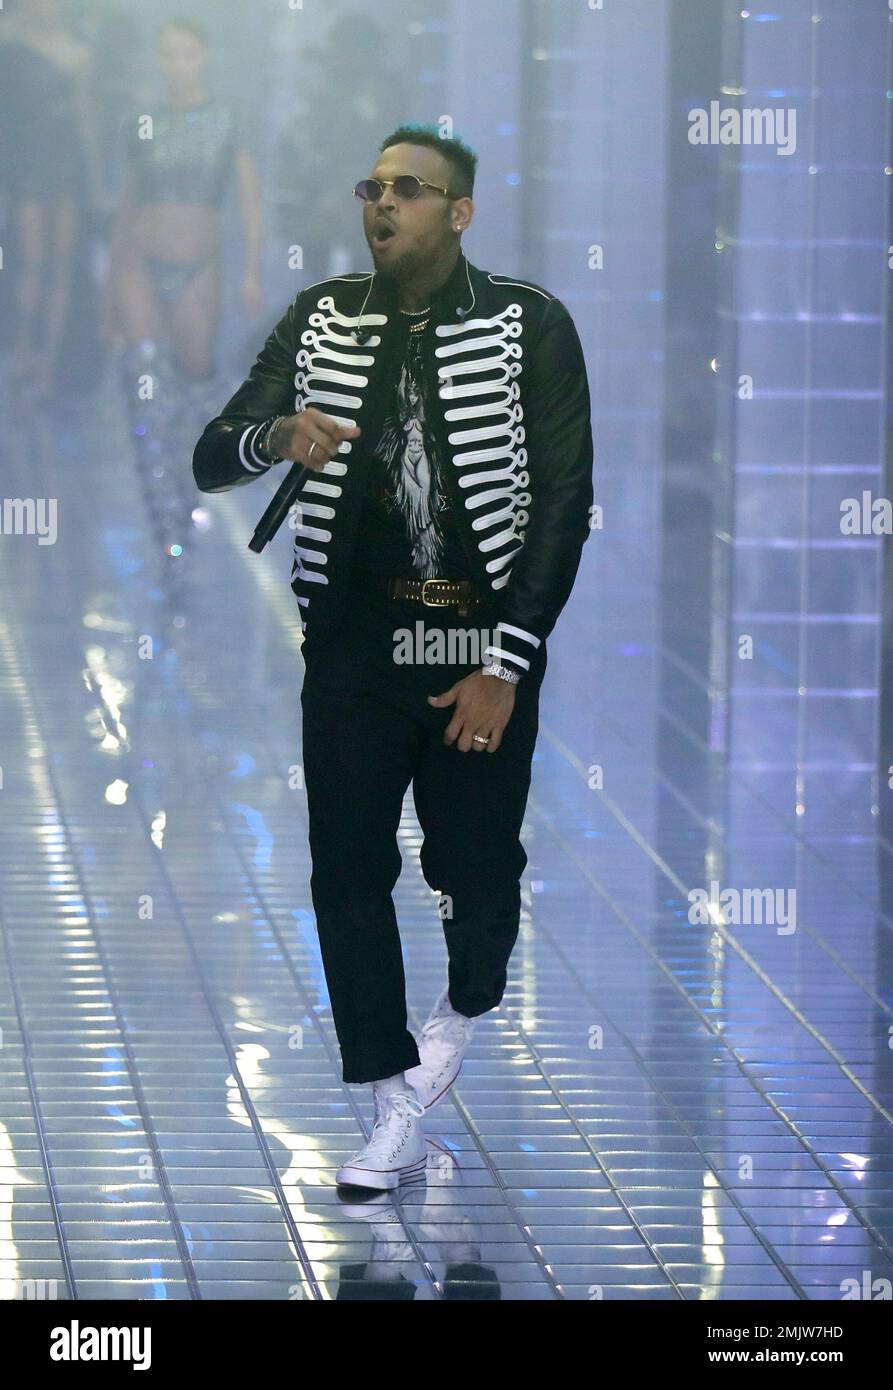 FILE - In this Sept. 21, 2018 file photo, US rapper Chris Brown performs  during Philipp Plein's women's 2019 Spring-Summer collection, unveiled  during the Fashion Week in Milan, Italy. The lawyer for